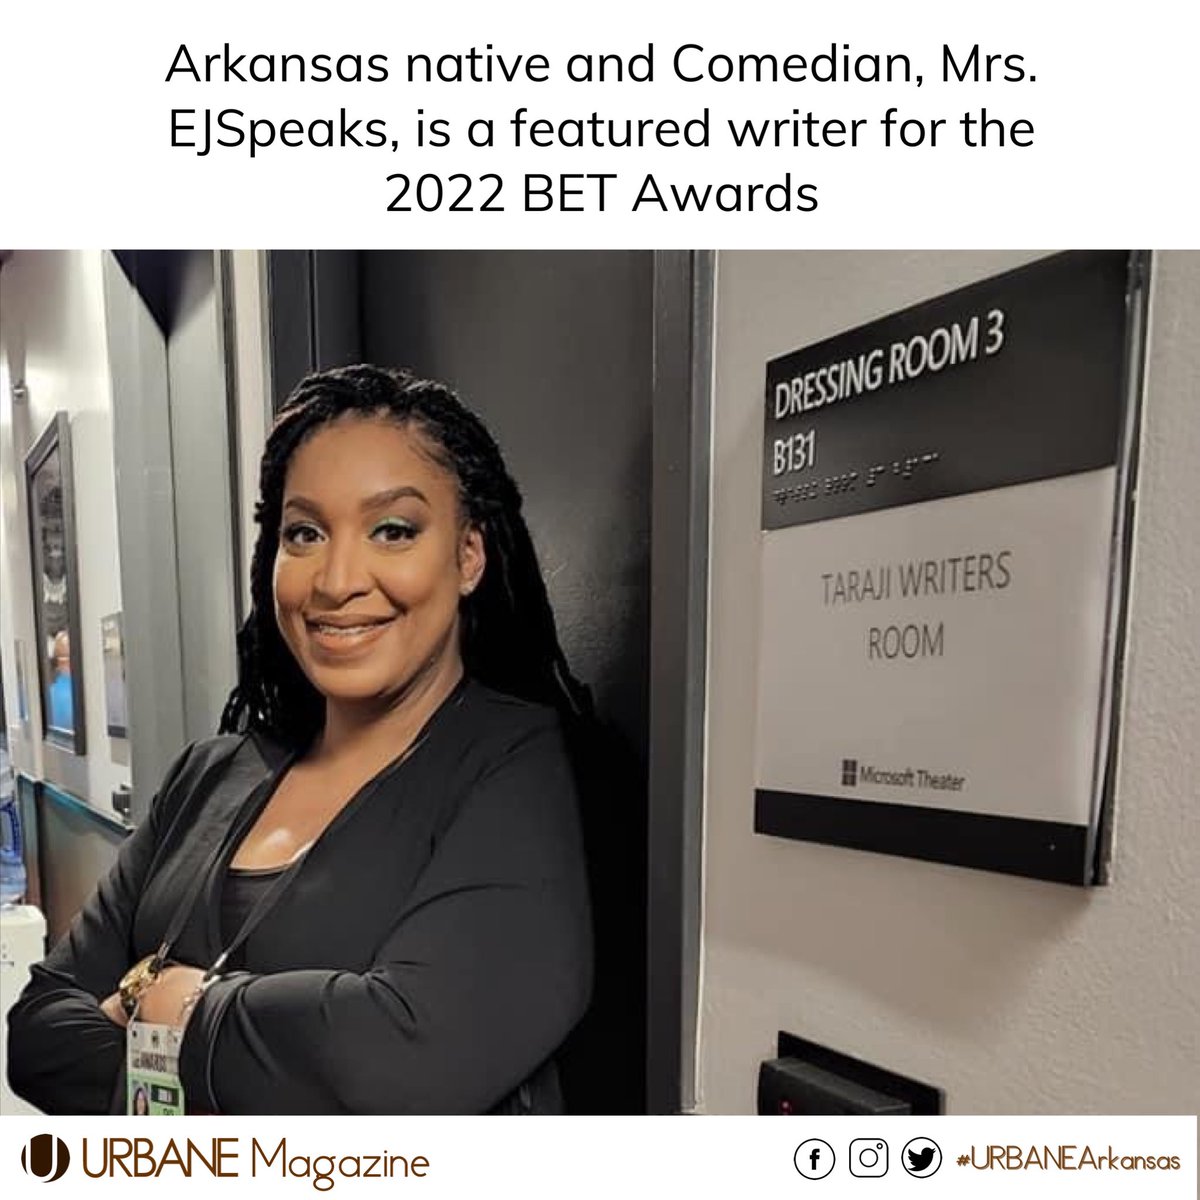 Arkansas’ own @mrs_ejspeaks was chosen as a writer for actress Taraji P. Henson for the 2022 BET Awards.

In a recent Facebook post, EJSpeaks writes:
“This year, I got to write for the BET Awards! ... My heart is so full❤️”

#BlackWriters #BlackComedians #URBANEArkansas